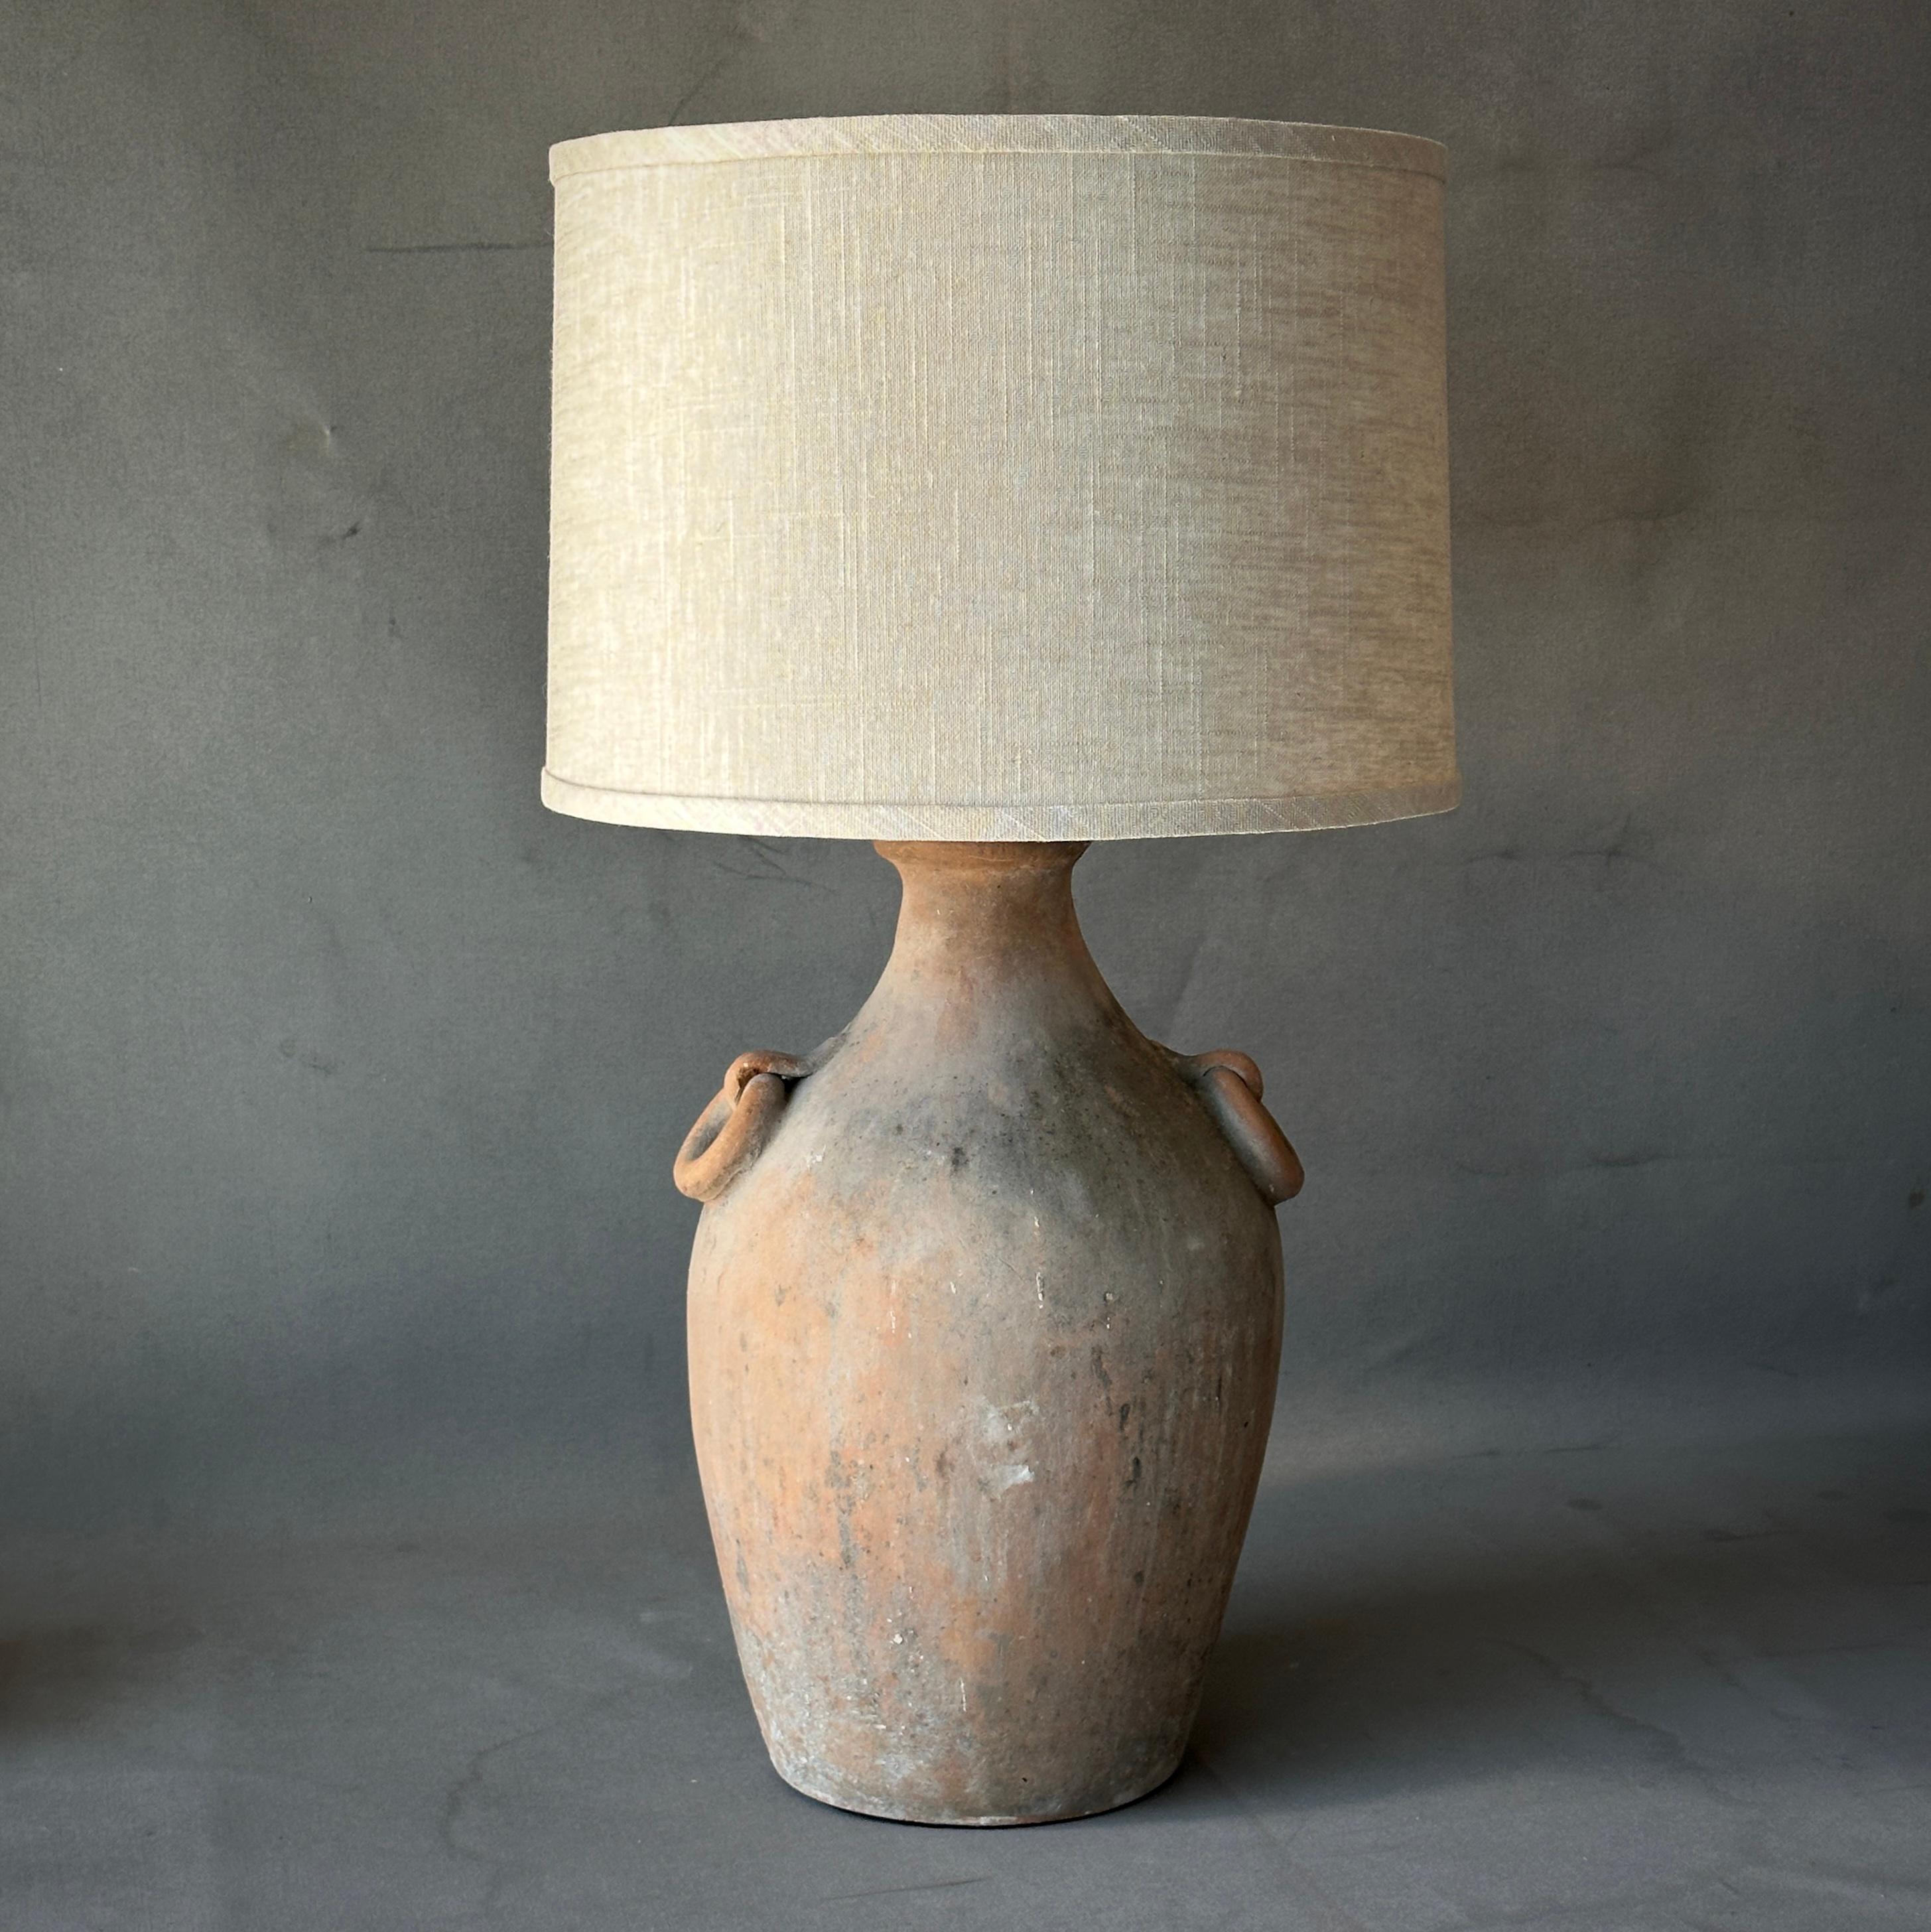 Hand-Crafted Decorative Terracotta Vessel as Lamp For Sale